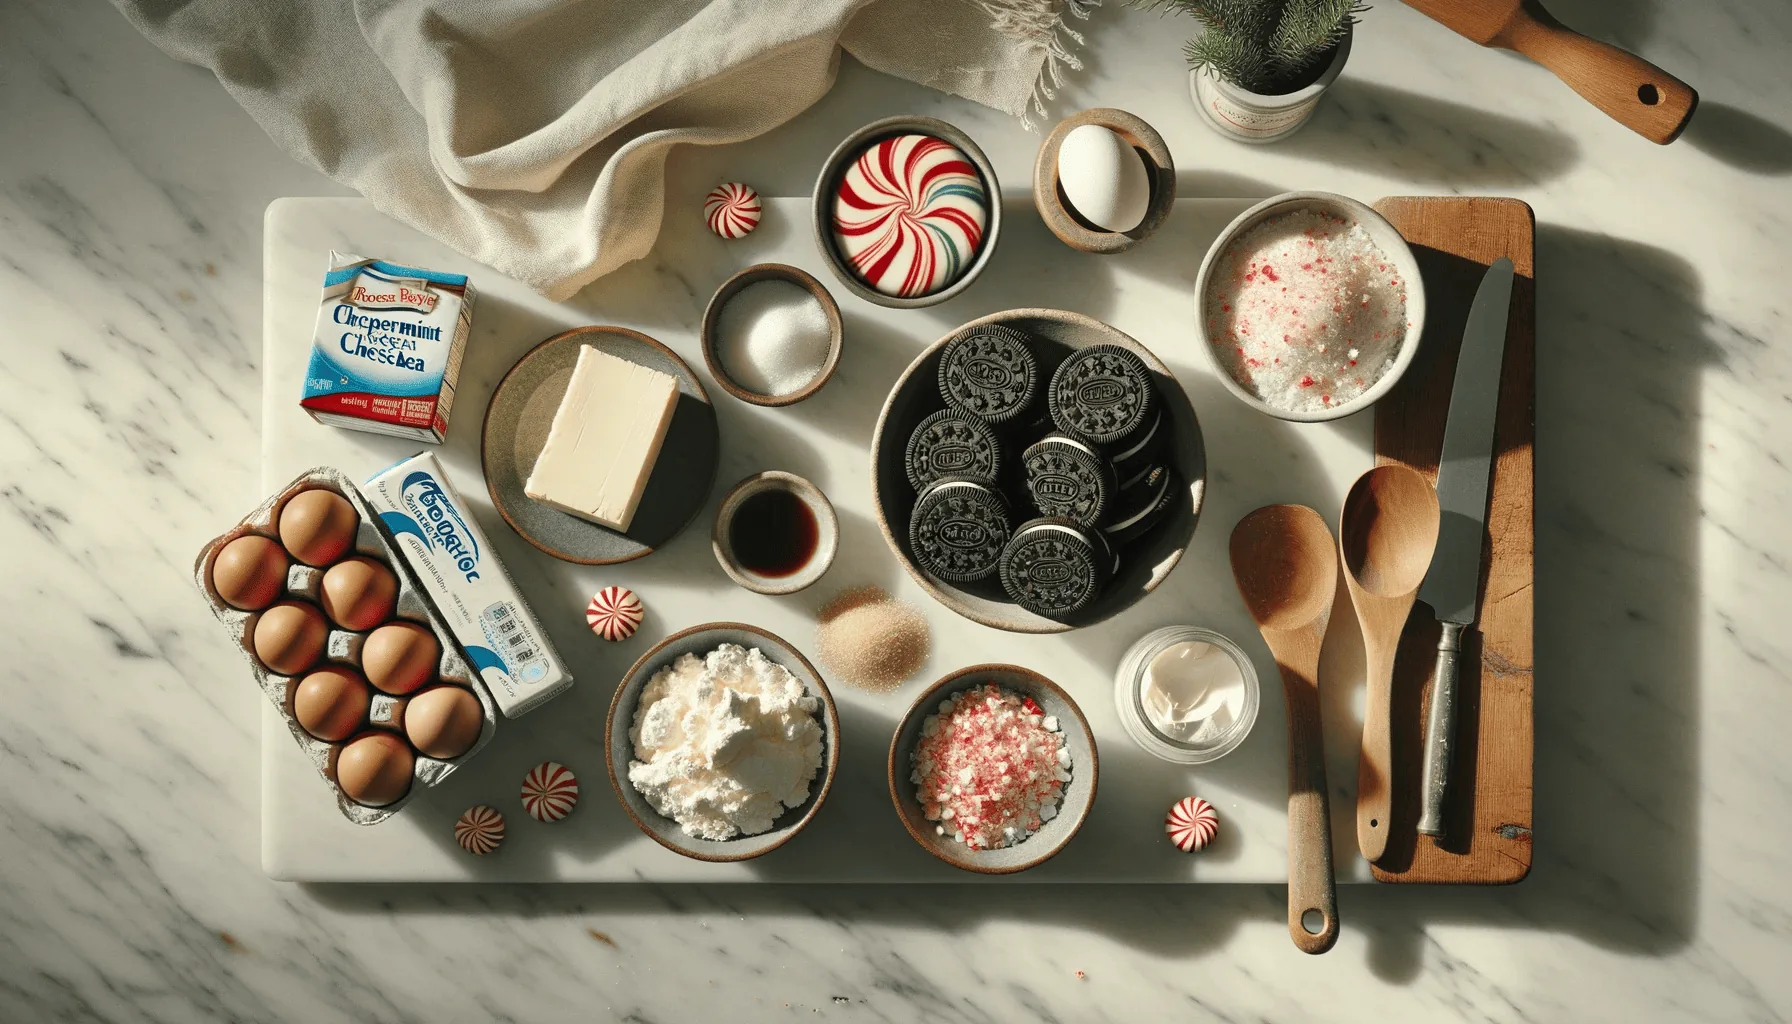 The ingredients for my Christmas peppermint cheesecake recipe